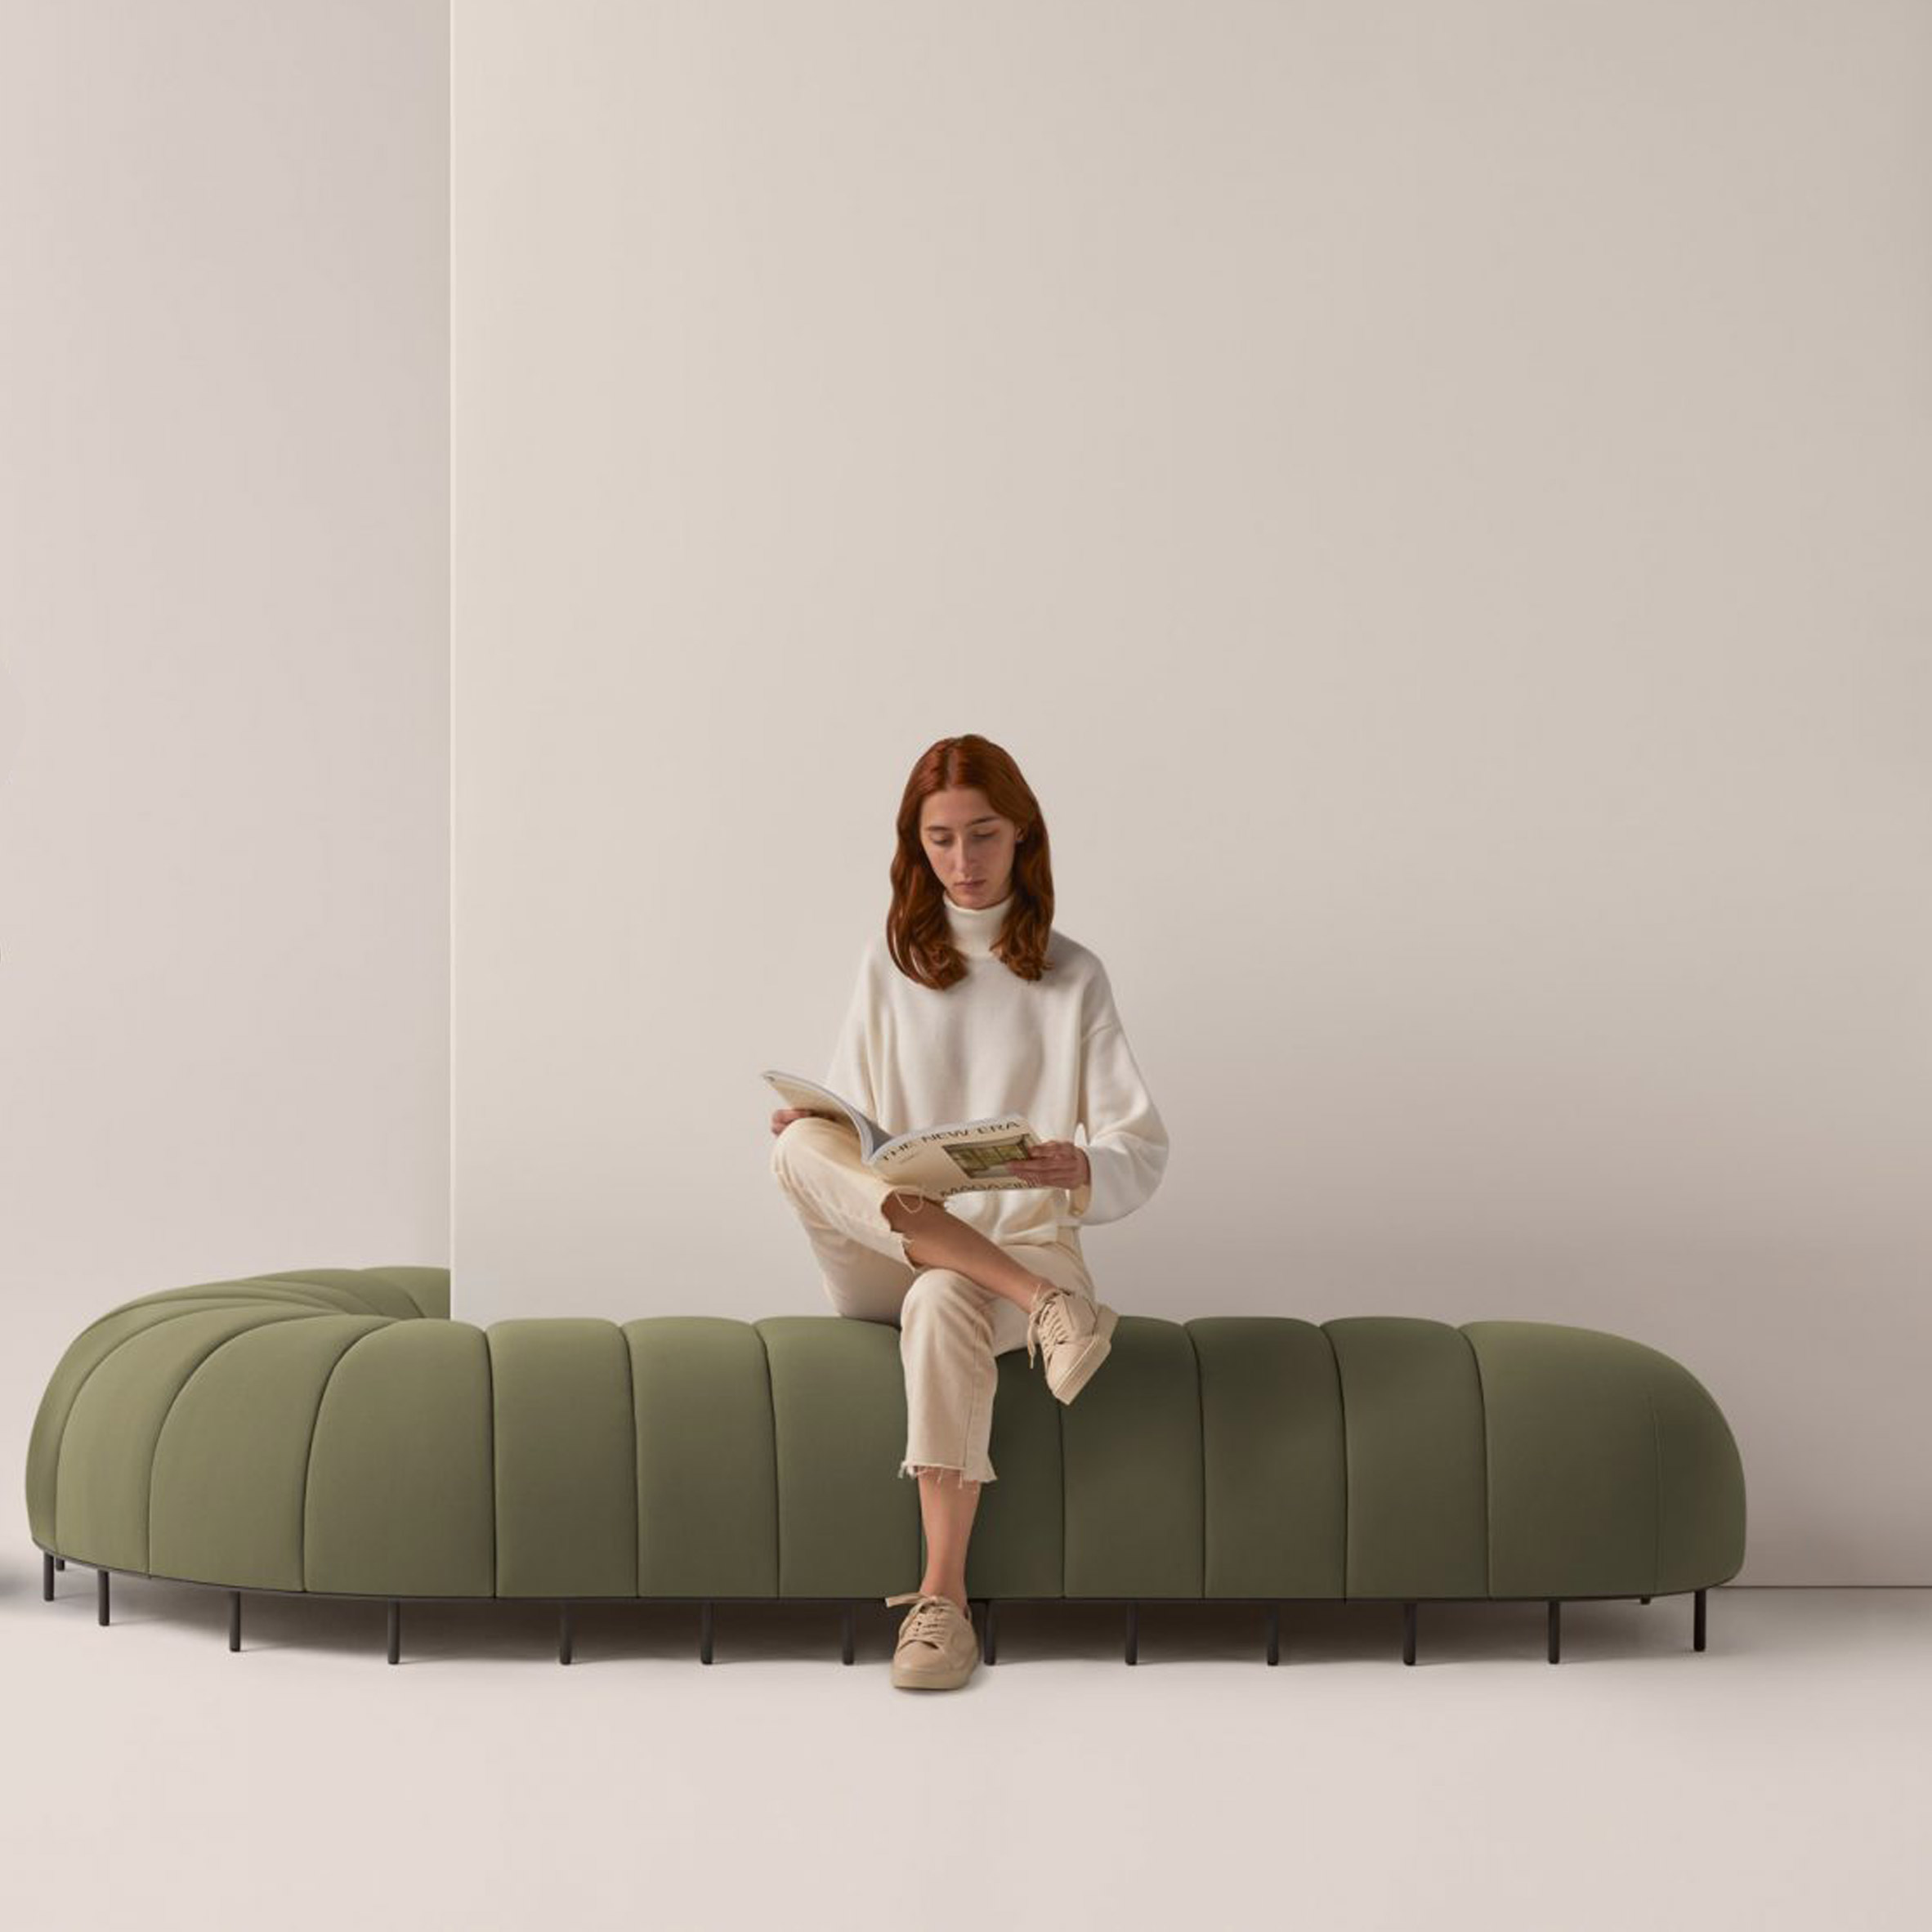 Green Worm sofa curving round a wall